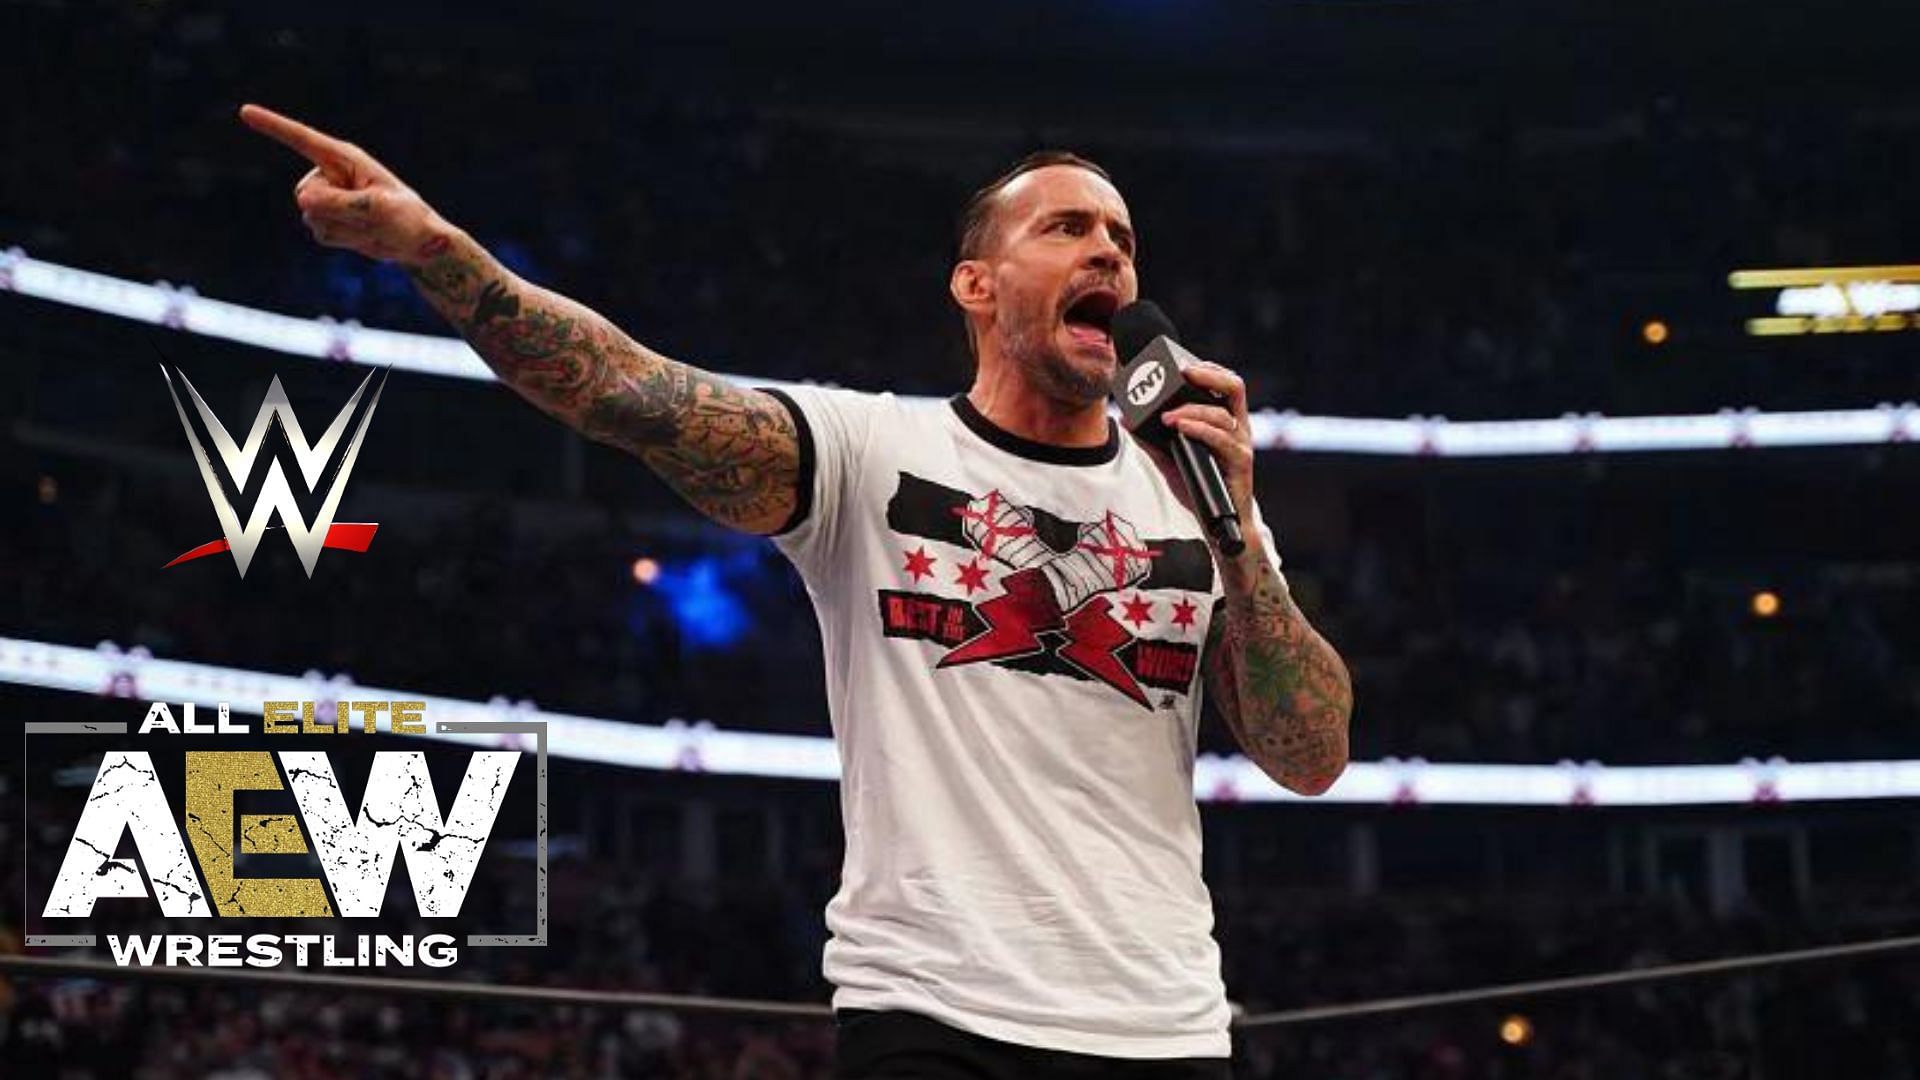 CM Punk and a former WWE Superstar seemingly had backstage heat.